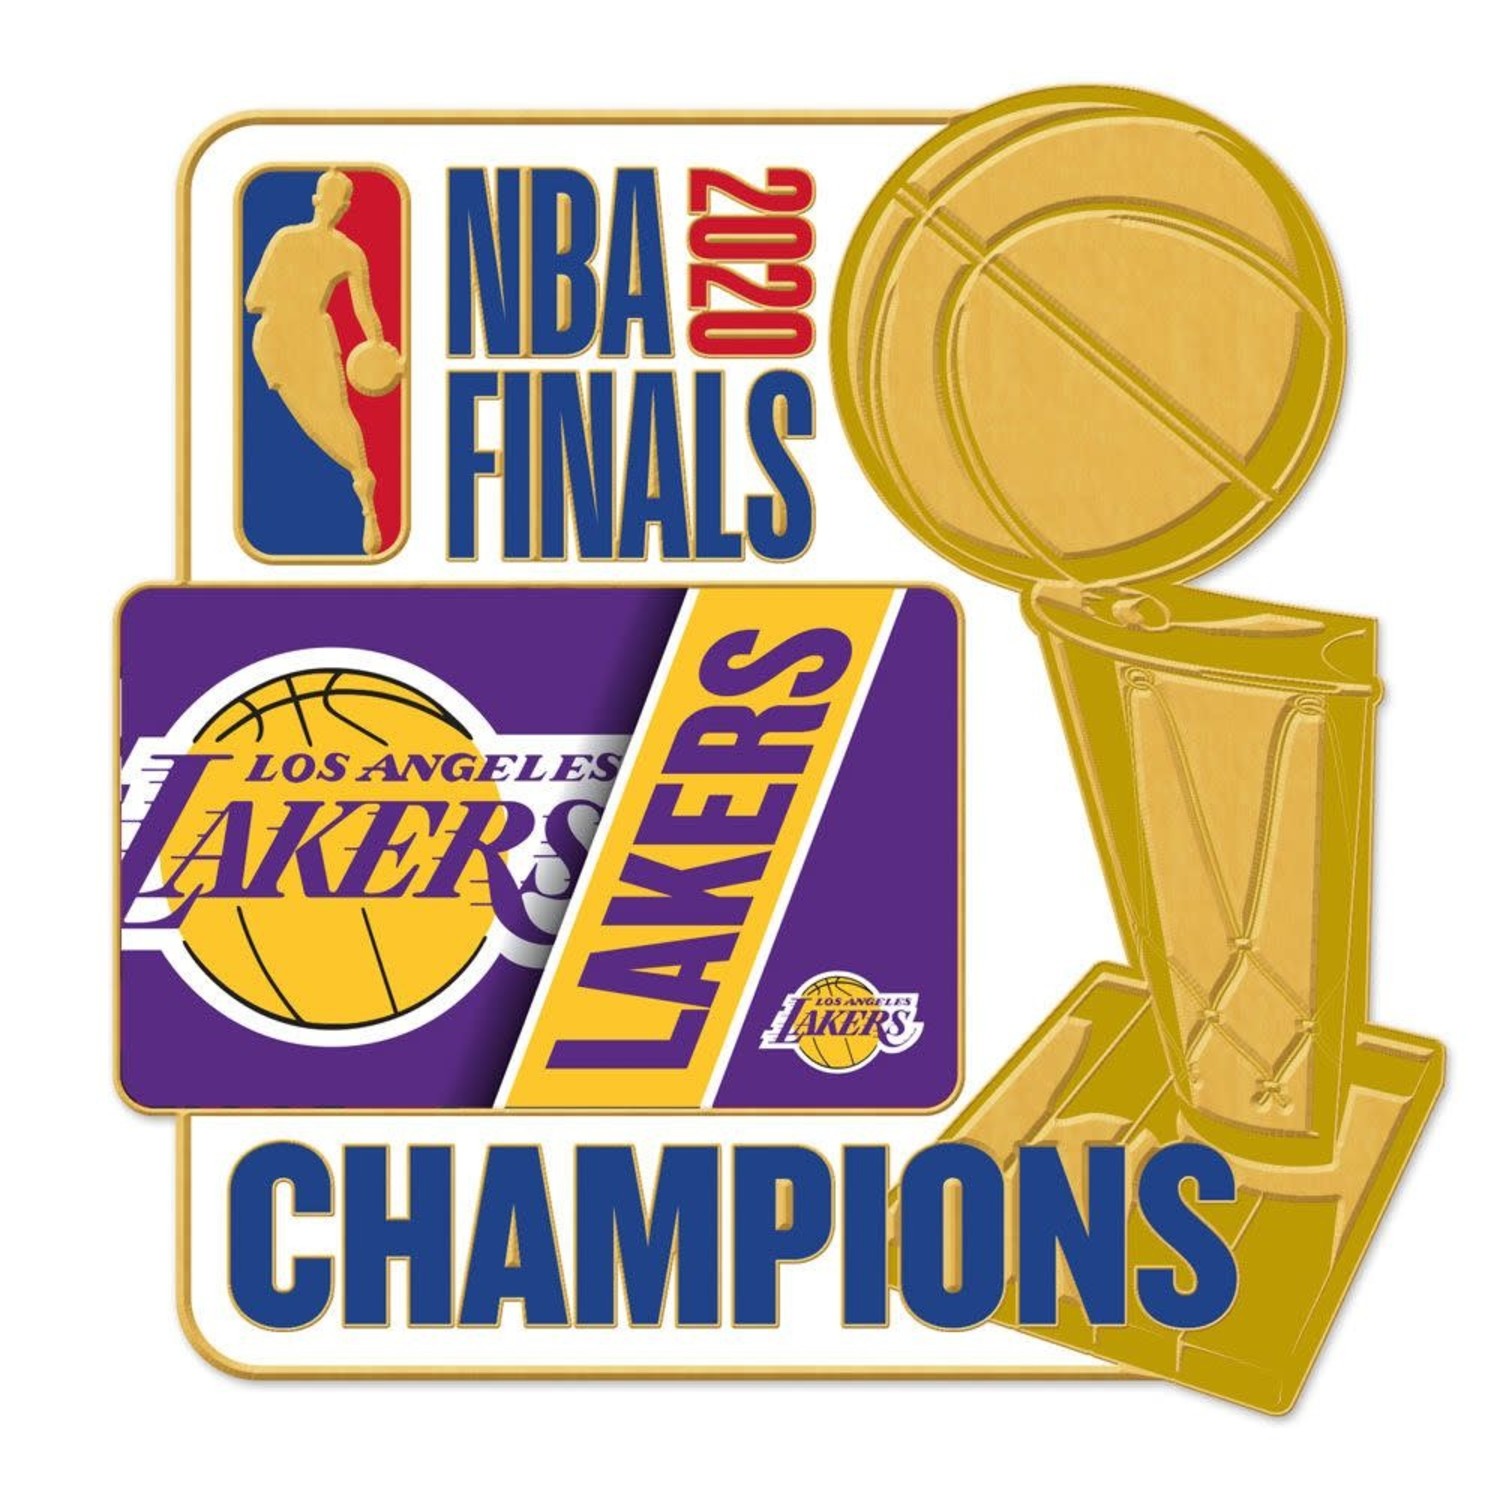 Lakers Championship 2020 17 Time NBA Finals Champions | Magnet